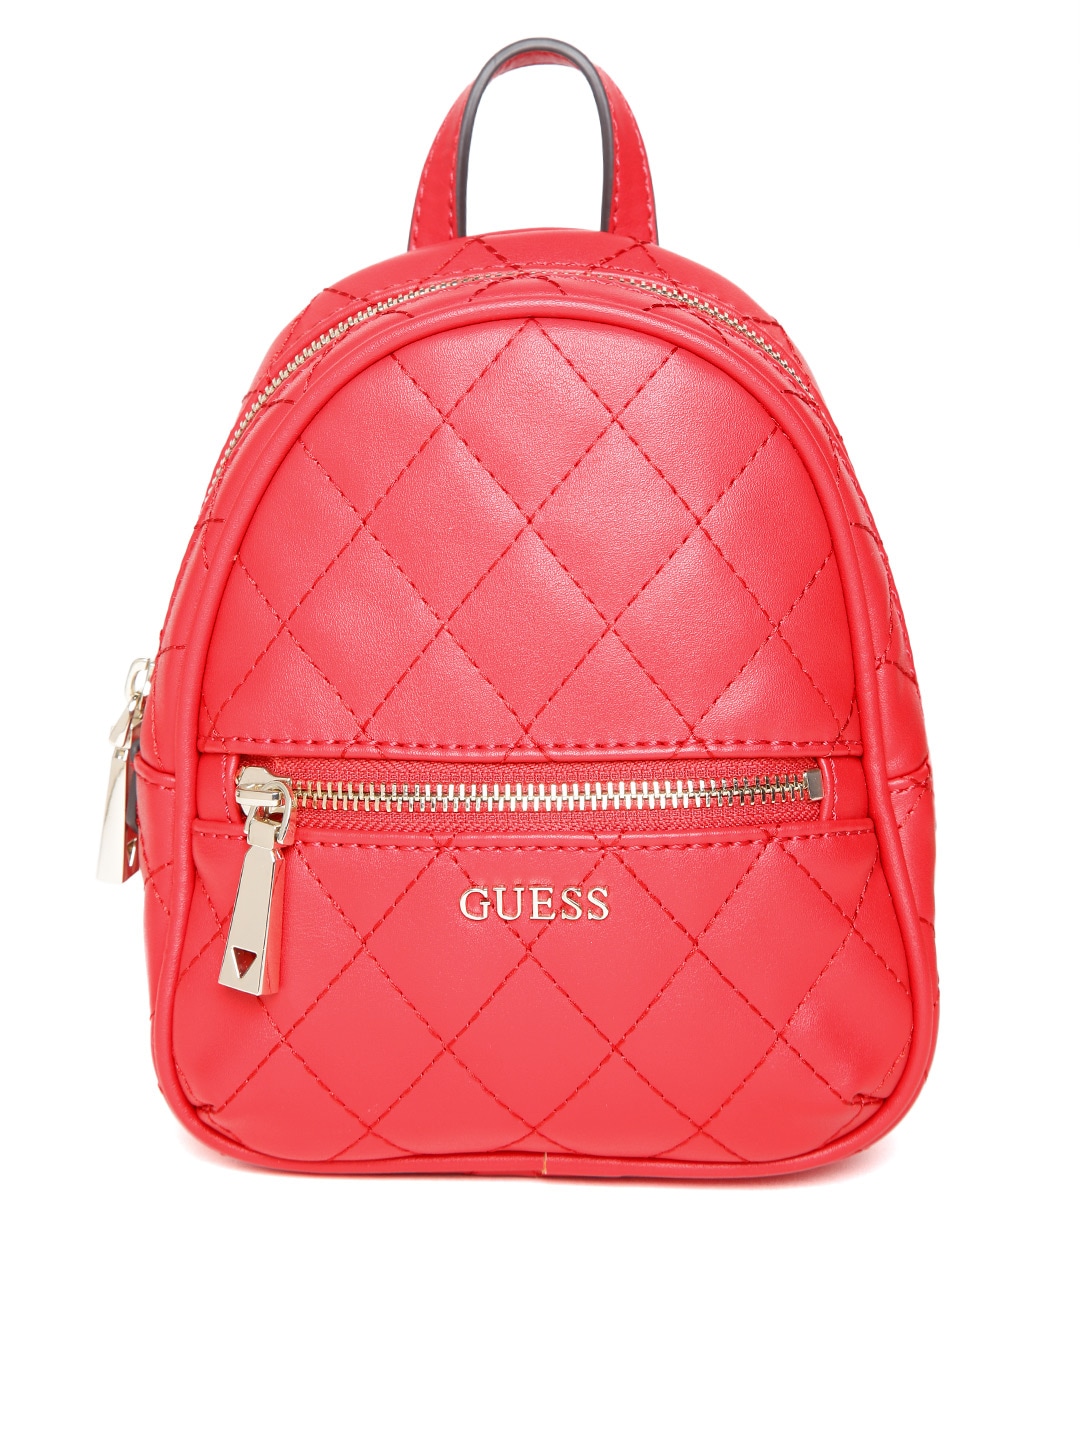 GUESS Women Red Quilted Backpack Price in India